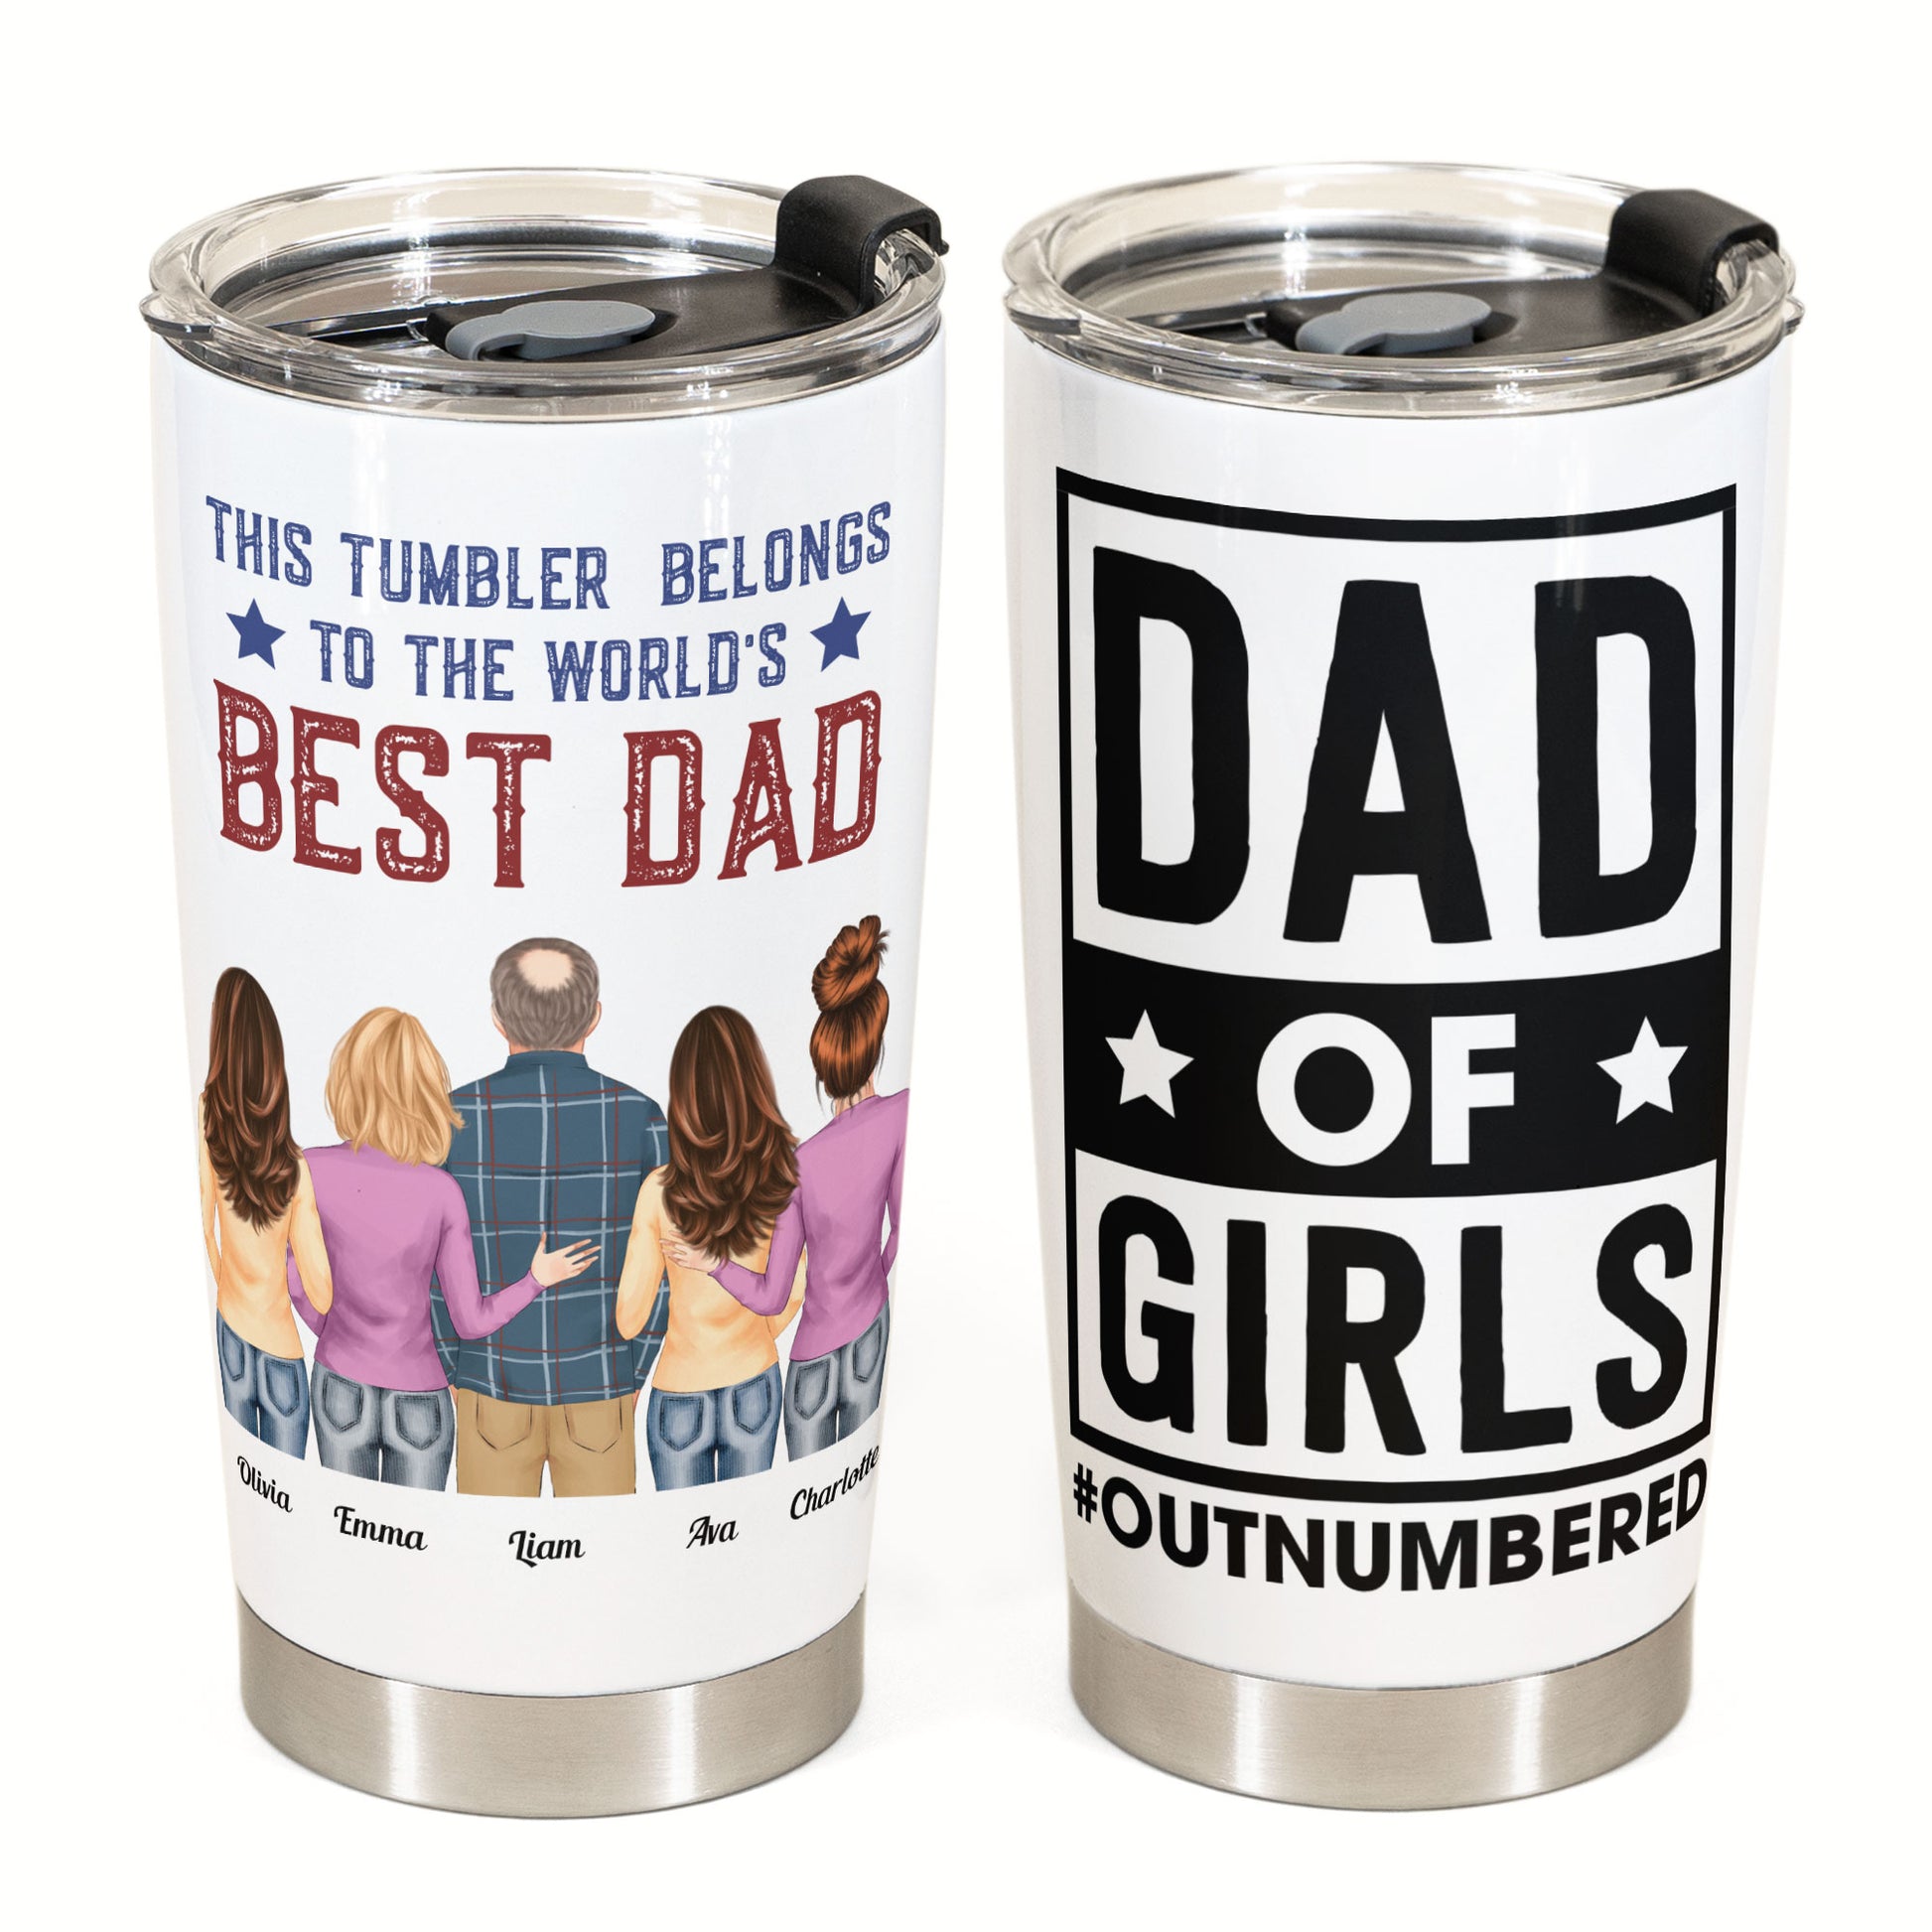 Dad Of Girls #Outnumbered - Personalized Tumbler Cup - Christmas Birthday Gift For Dad - From Son, Daughter